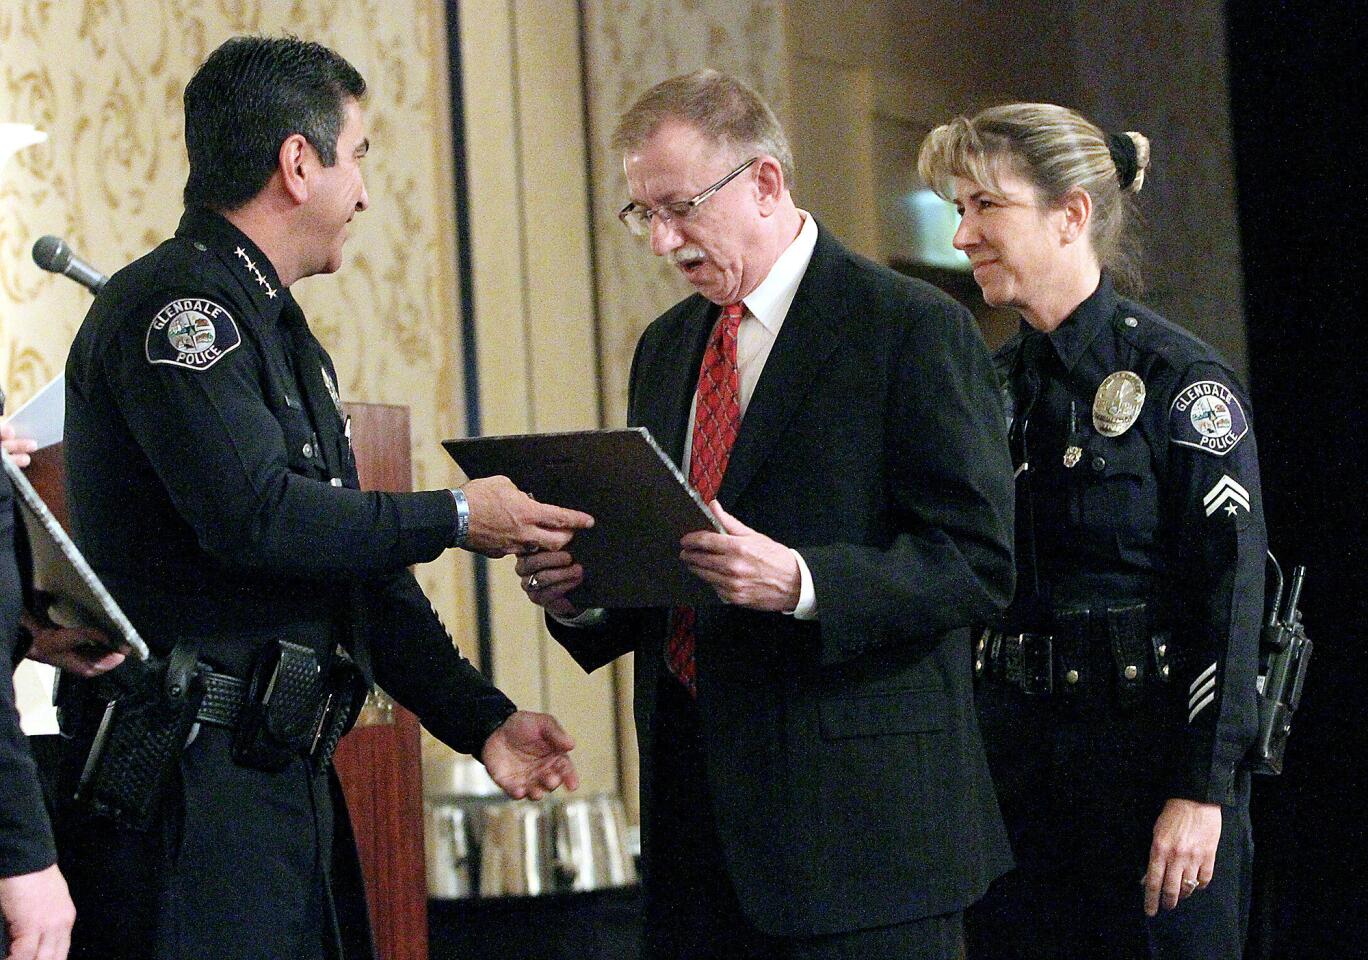 Photo Gallery: Annual Glendale Police awards luncheon